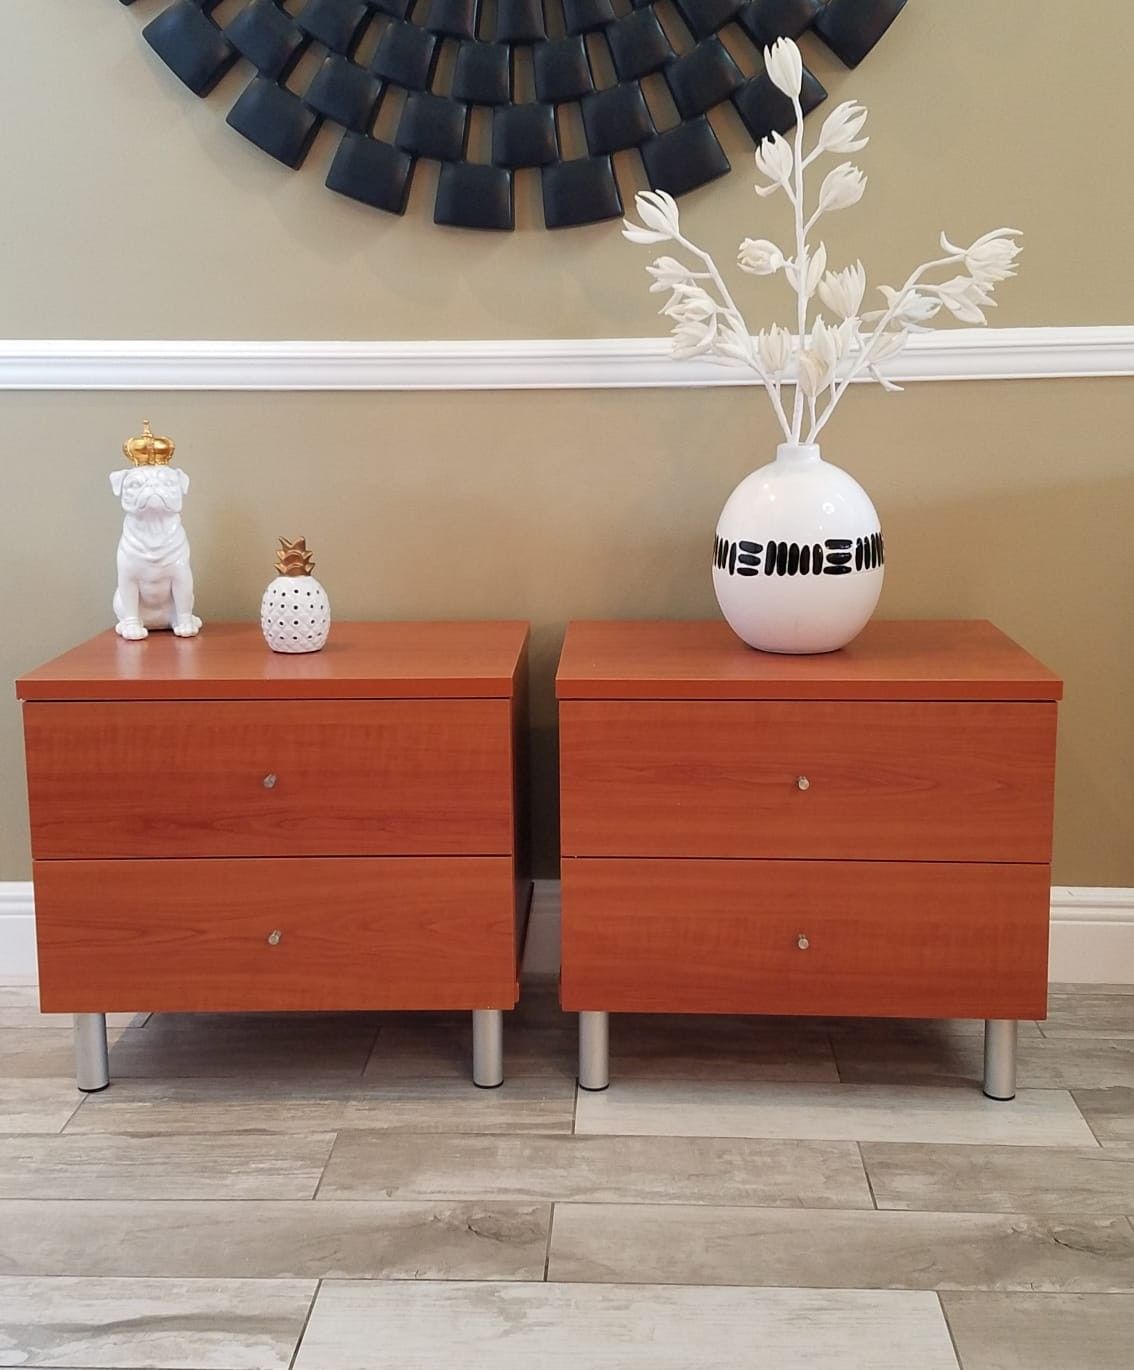 BRAND NEW....Brand new modern cherry wood two drawer nightstands / end tables with silver tubes legs H=21" d=16" w=22.75"